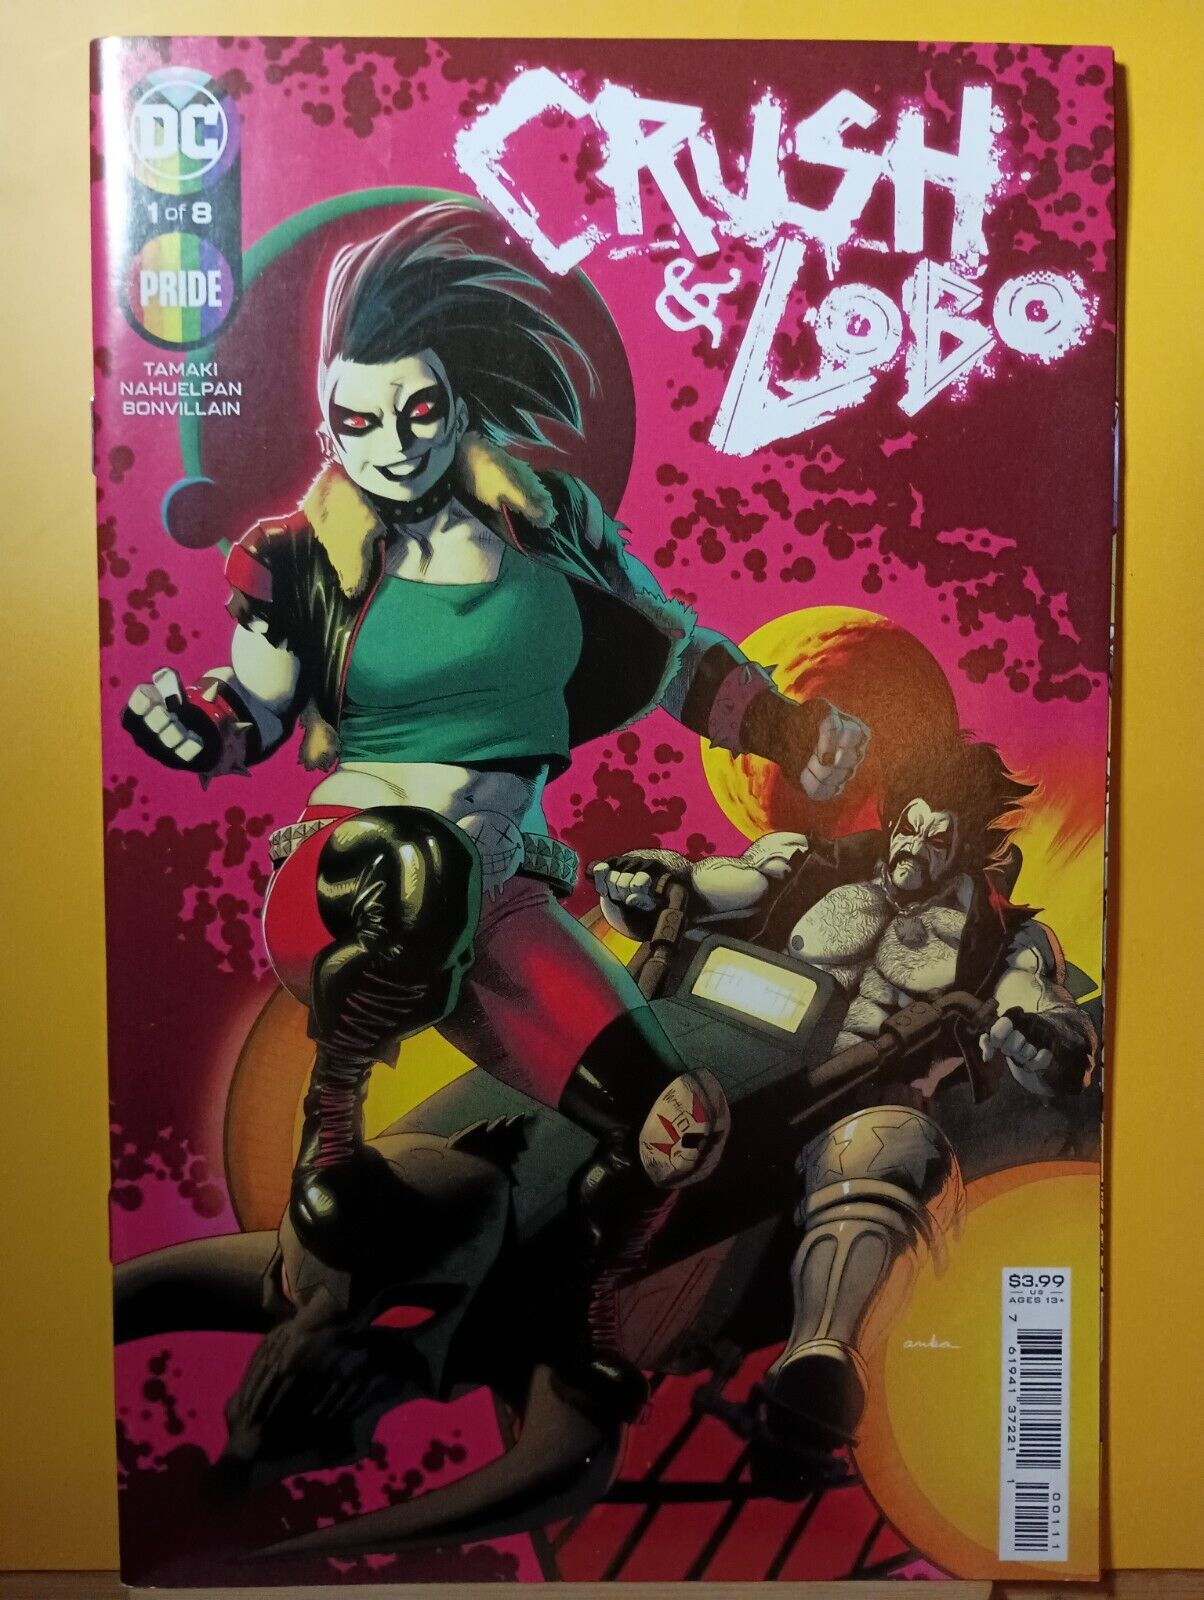 2021 DC Comics Crush and Lobo Issue 1 Kris Anka Pride Month Cover A Variant F/S